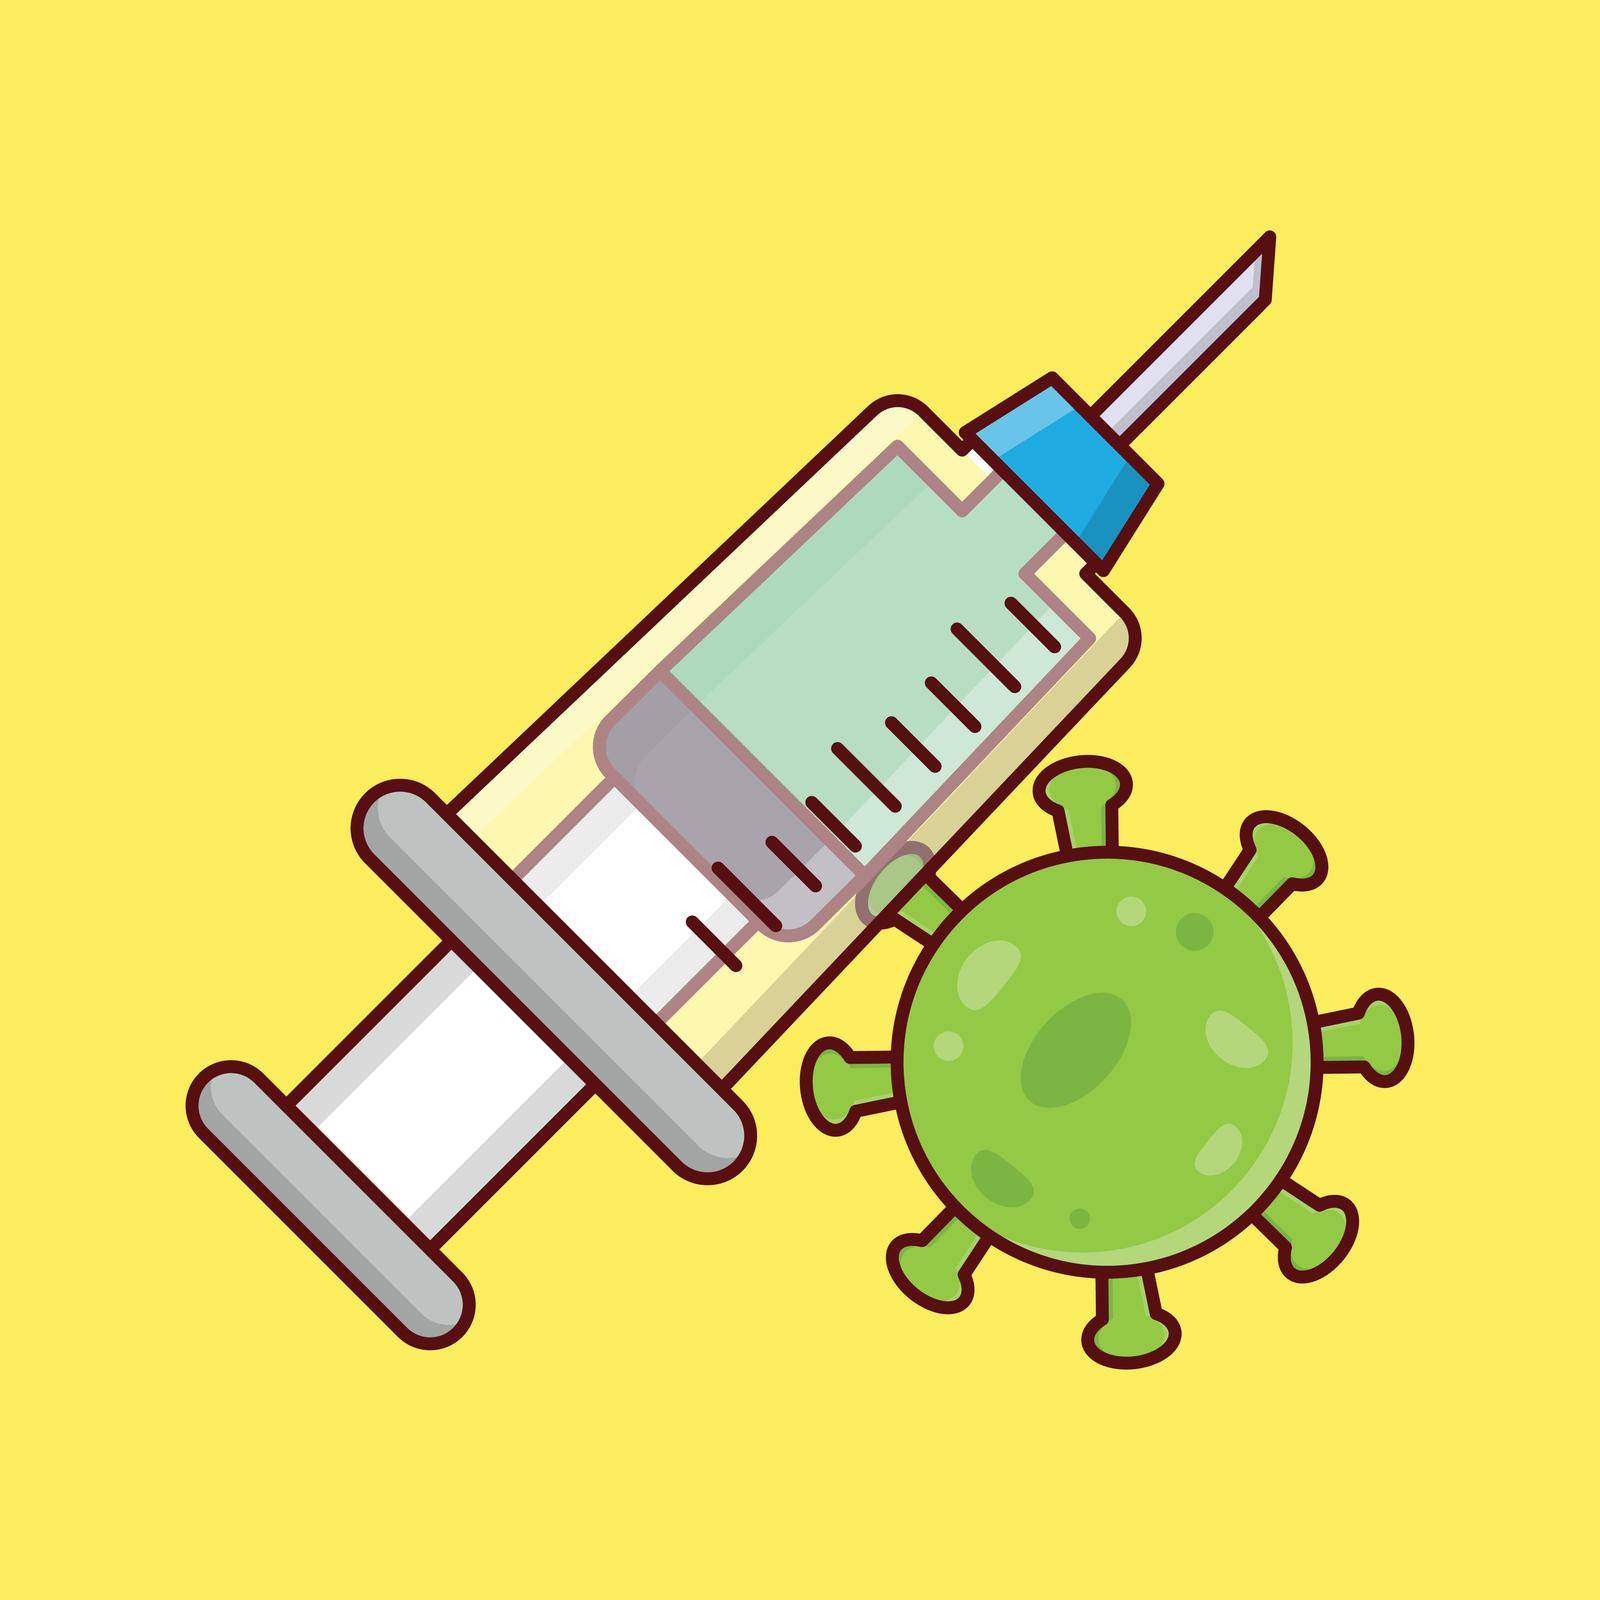 injection by FlaticonsDesign